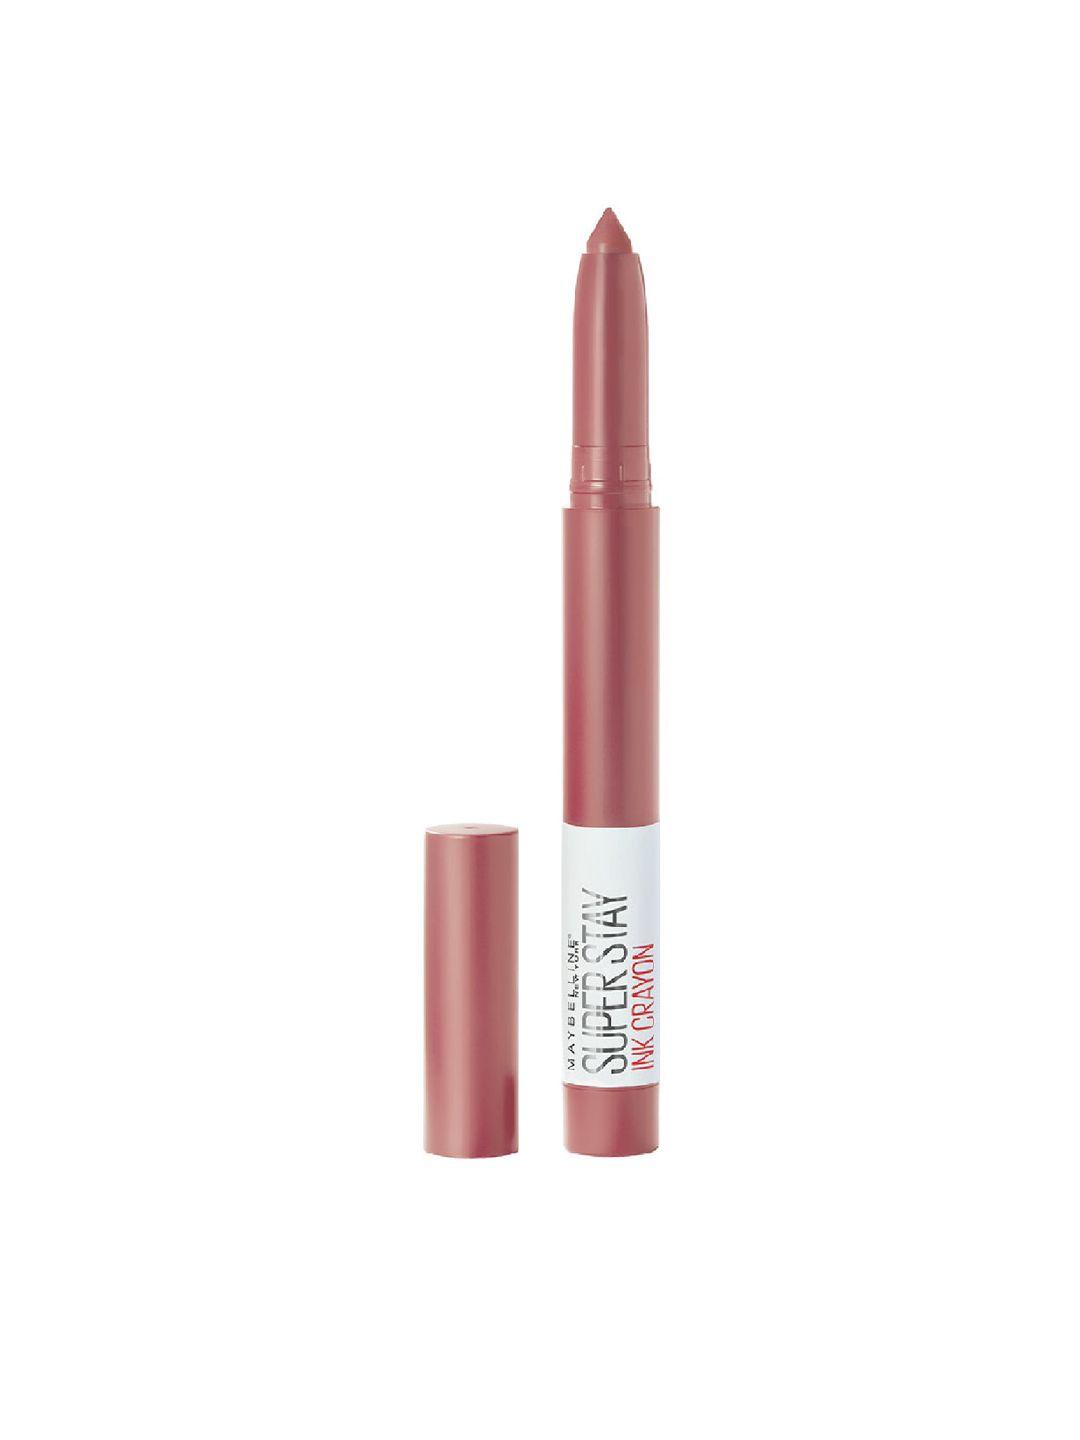 maybelline new york superstay matte ink crayon lipstick - lead the way 15